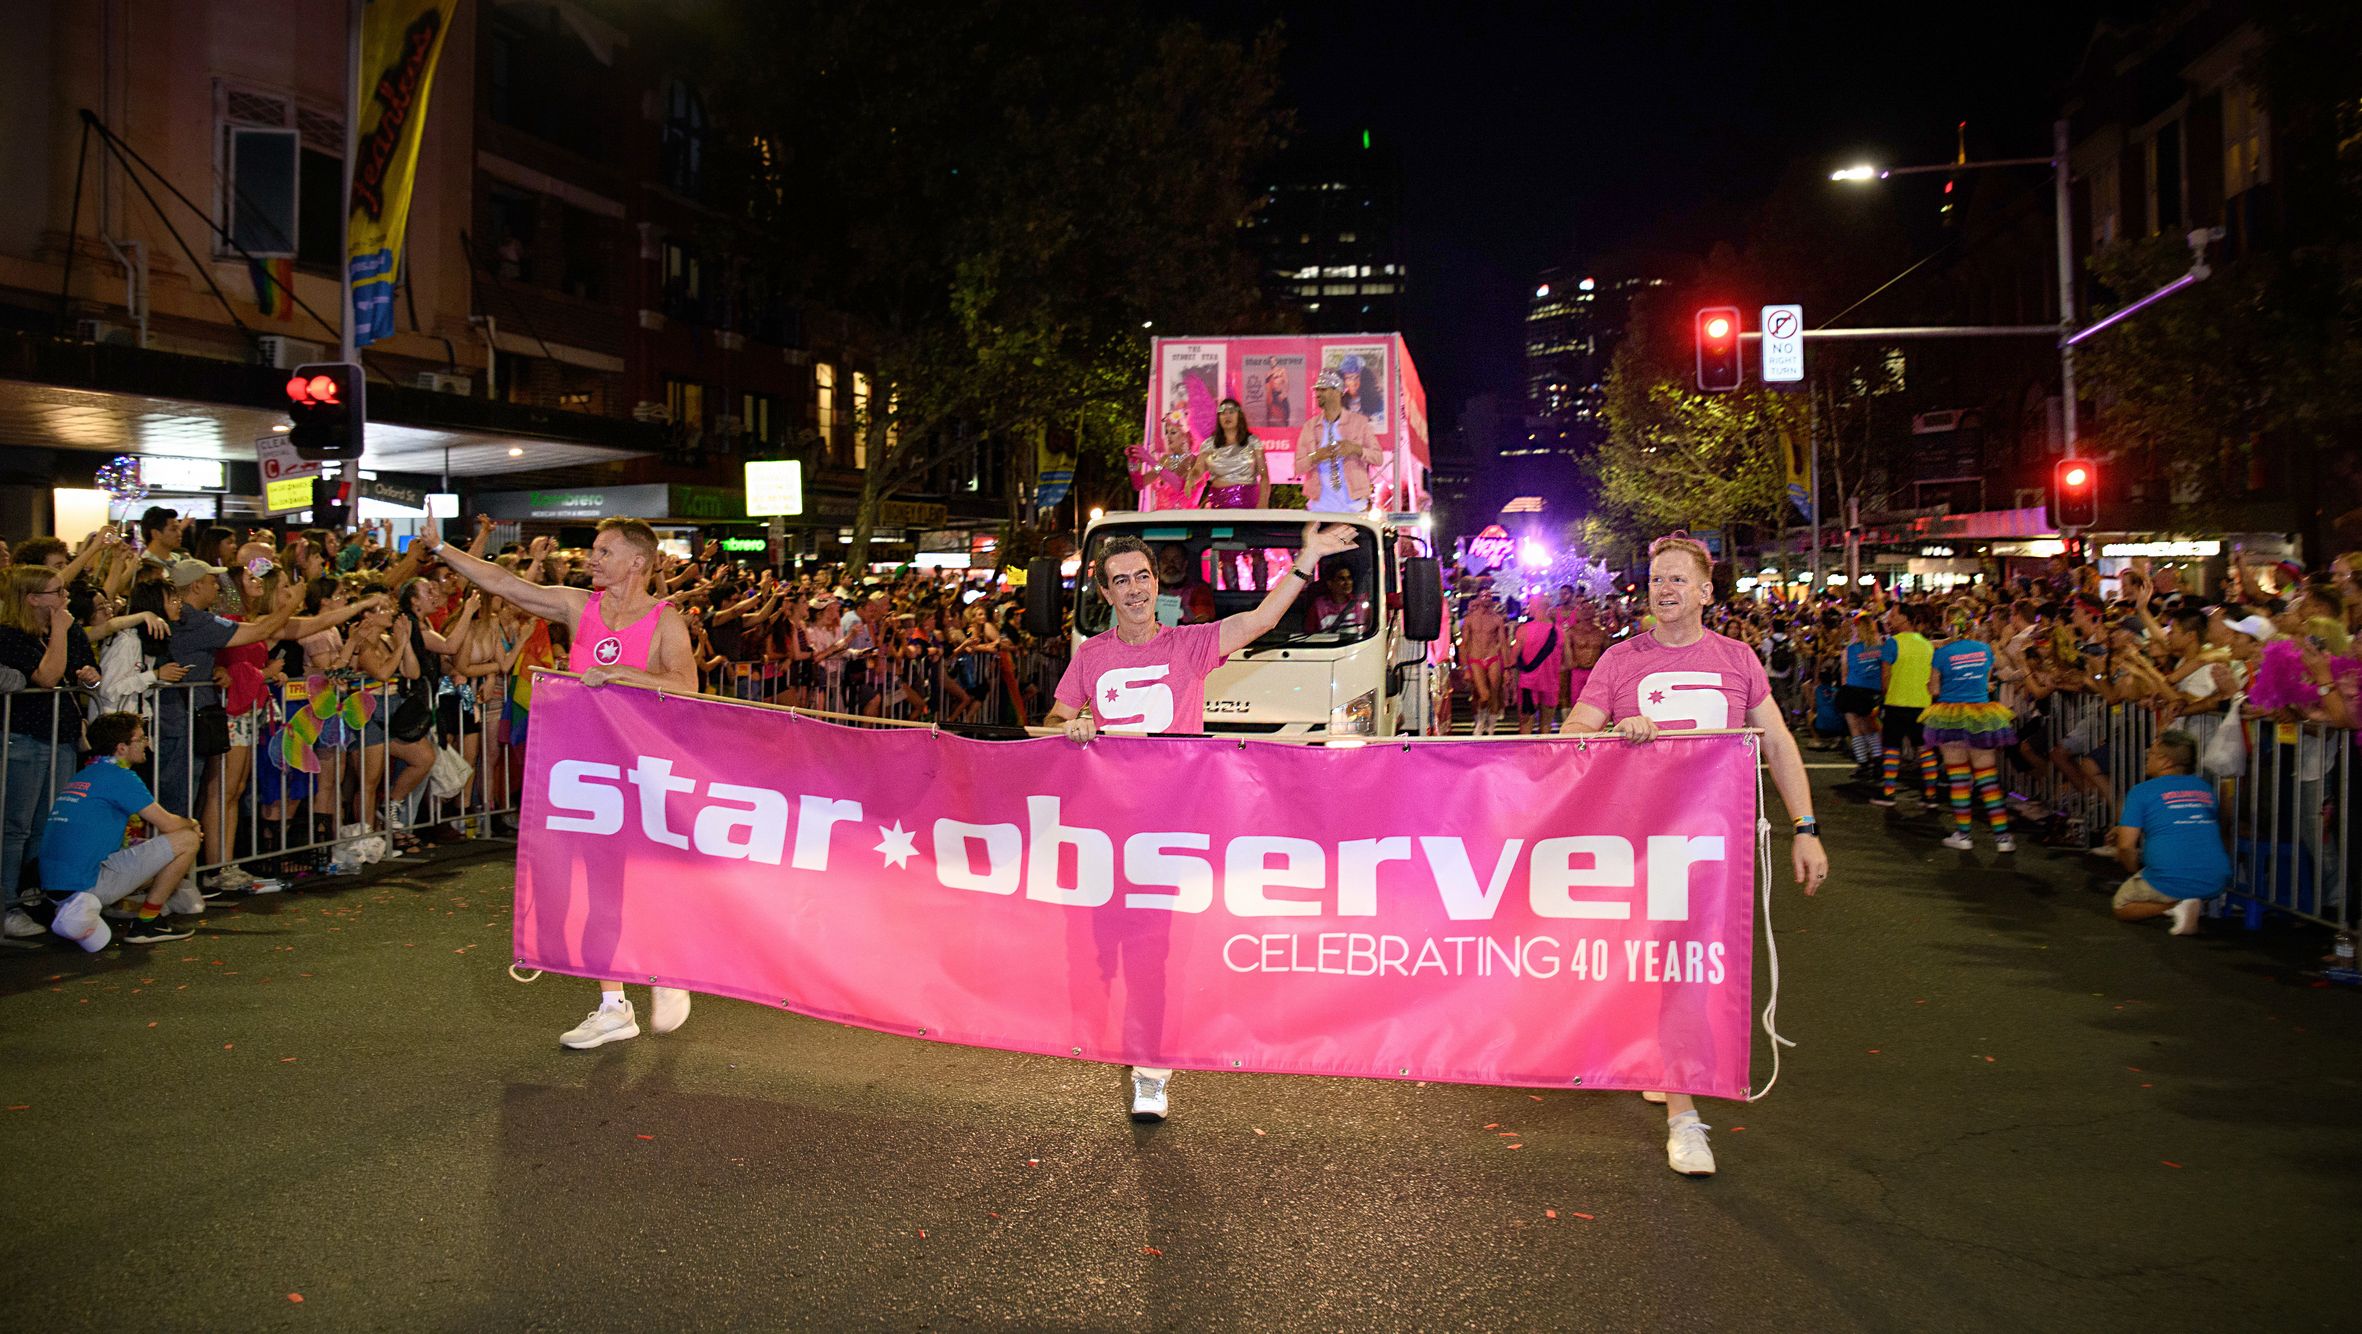 Star Observer seeks new contributors – get in touch!